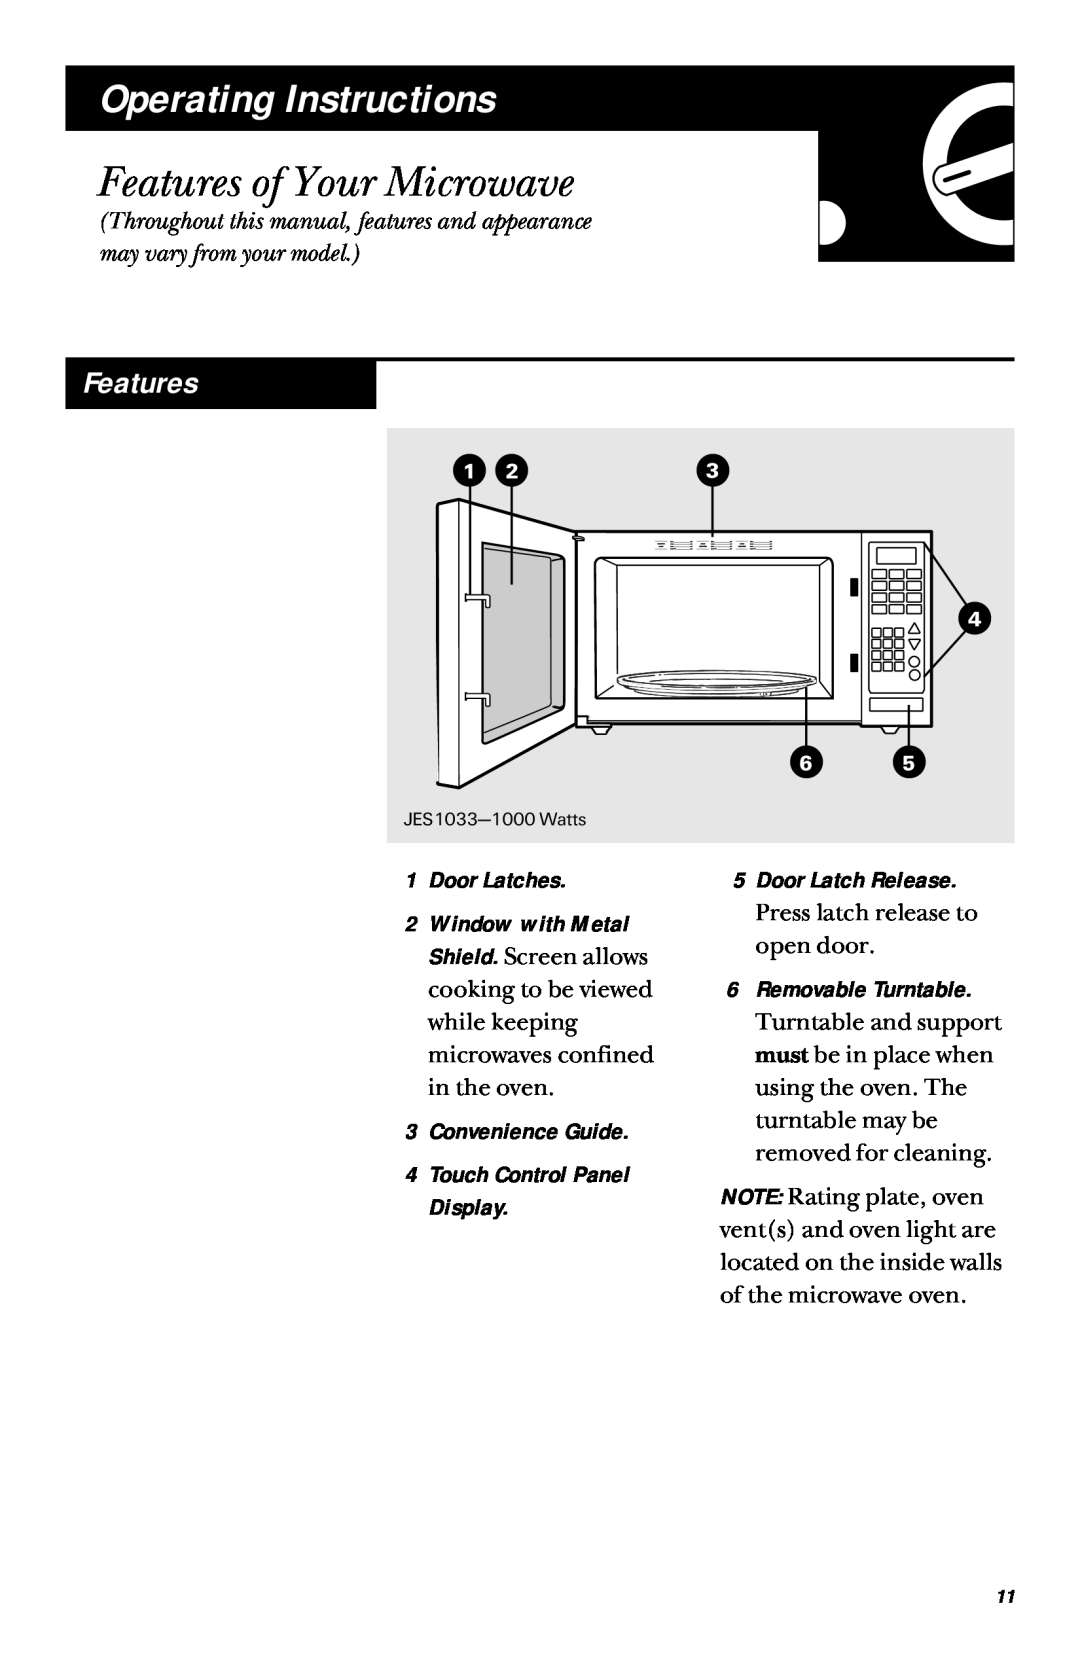 GE JES1033 Operating Instructions, Features of Your Microwave, Door Latches, Door Latch Release, Removable Turntable 